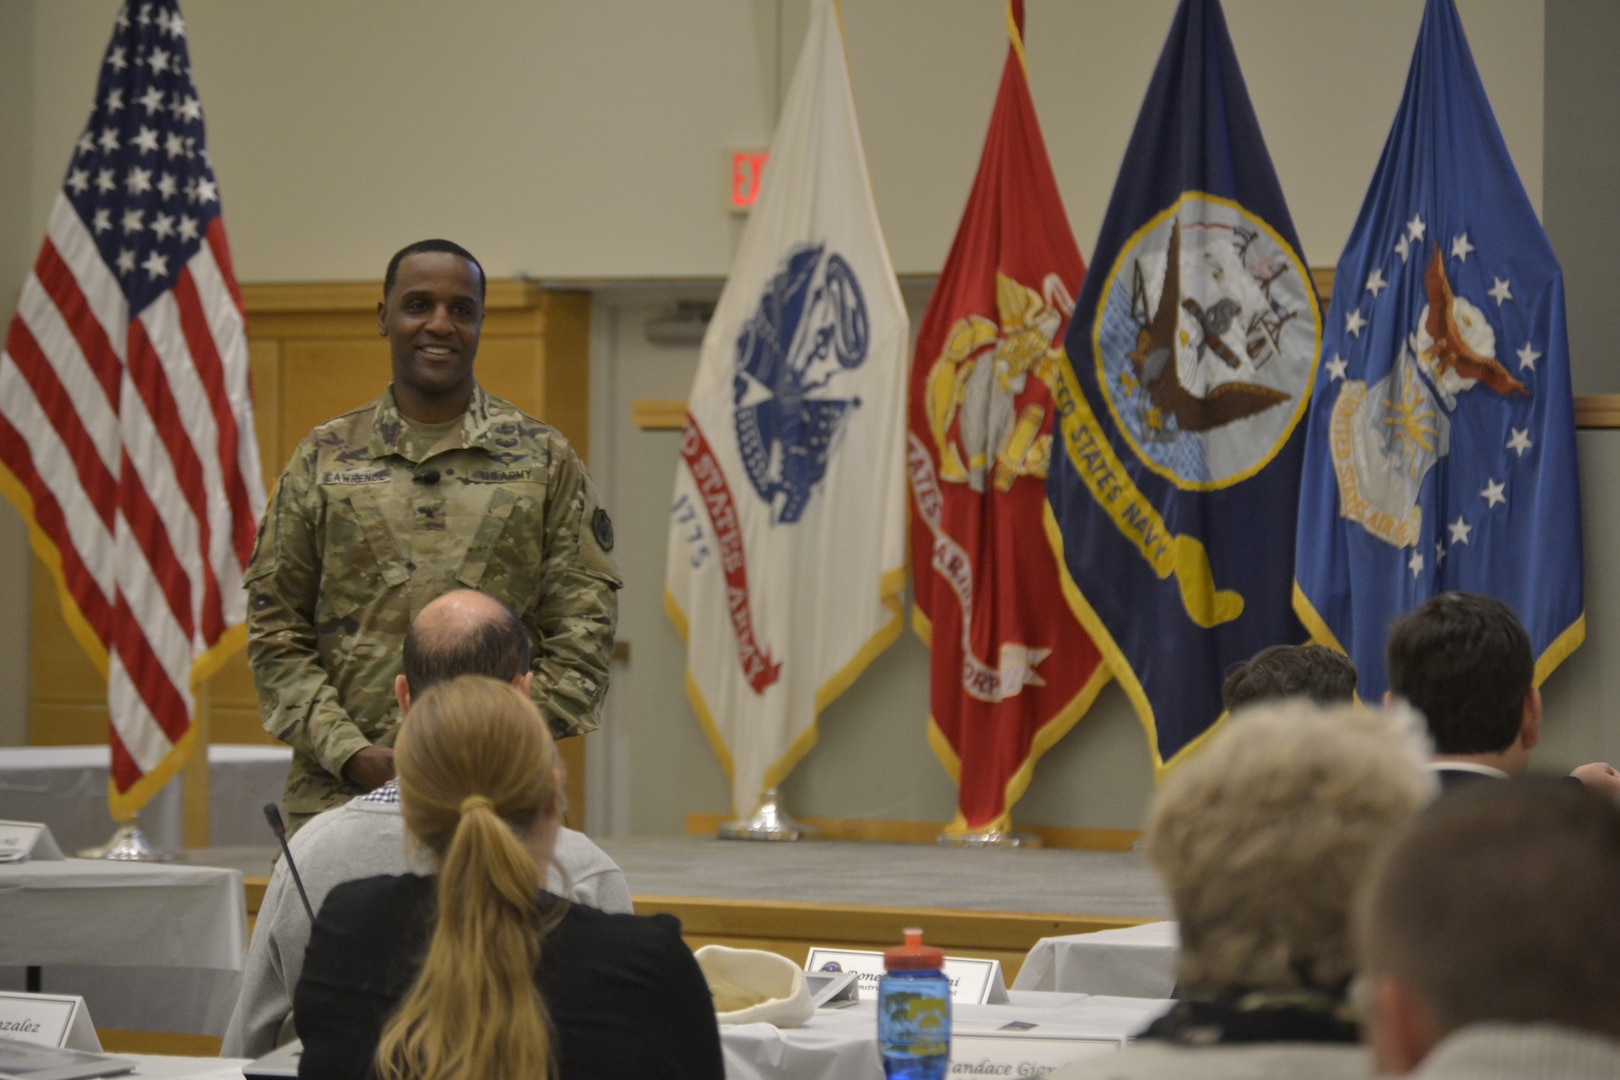 DLA Troop Support Commander Army Brig. Gen. Gavin Lawrence exchanges comments with employees after a three-day Troop Support Leadership Academy program Oct. 10, 2019, in Philadelphia.